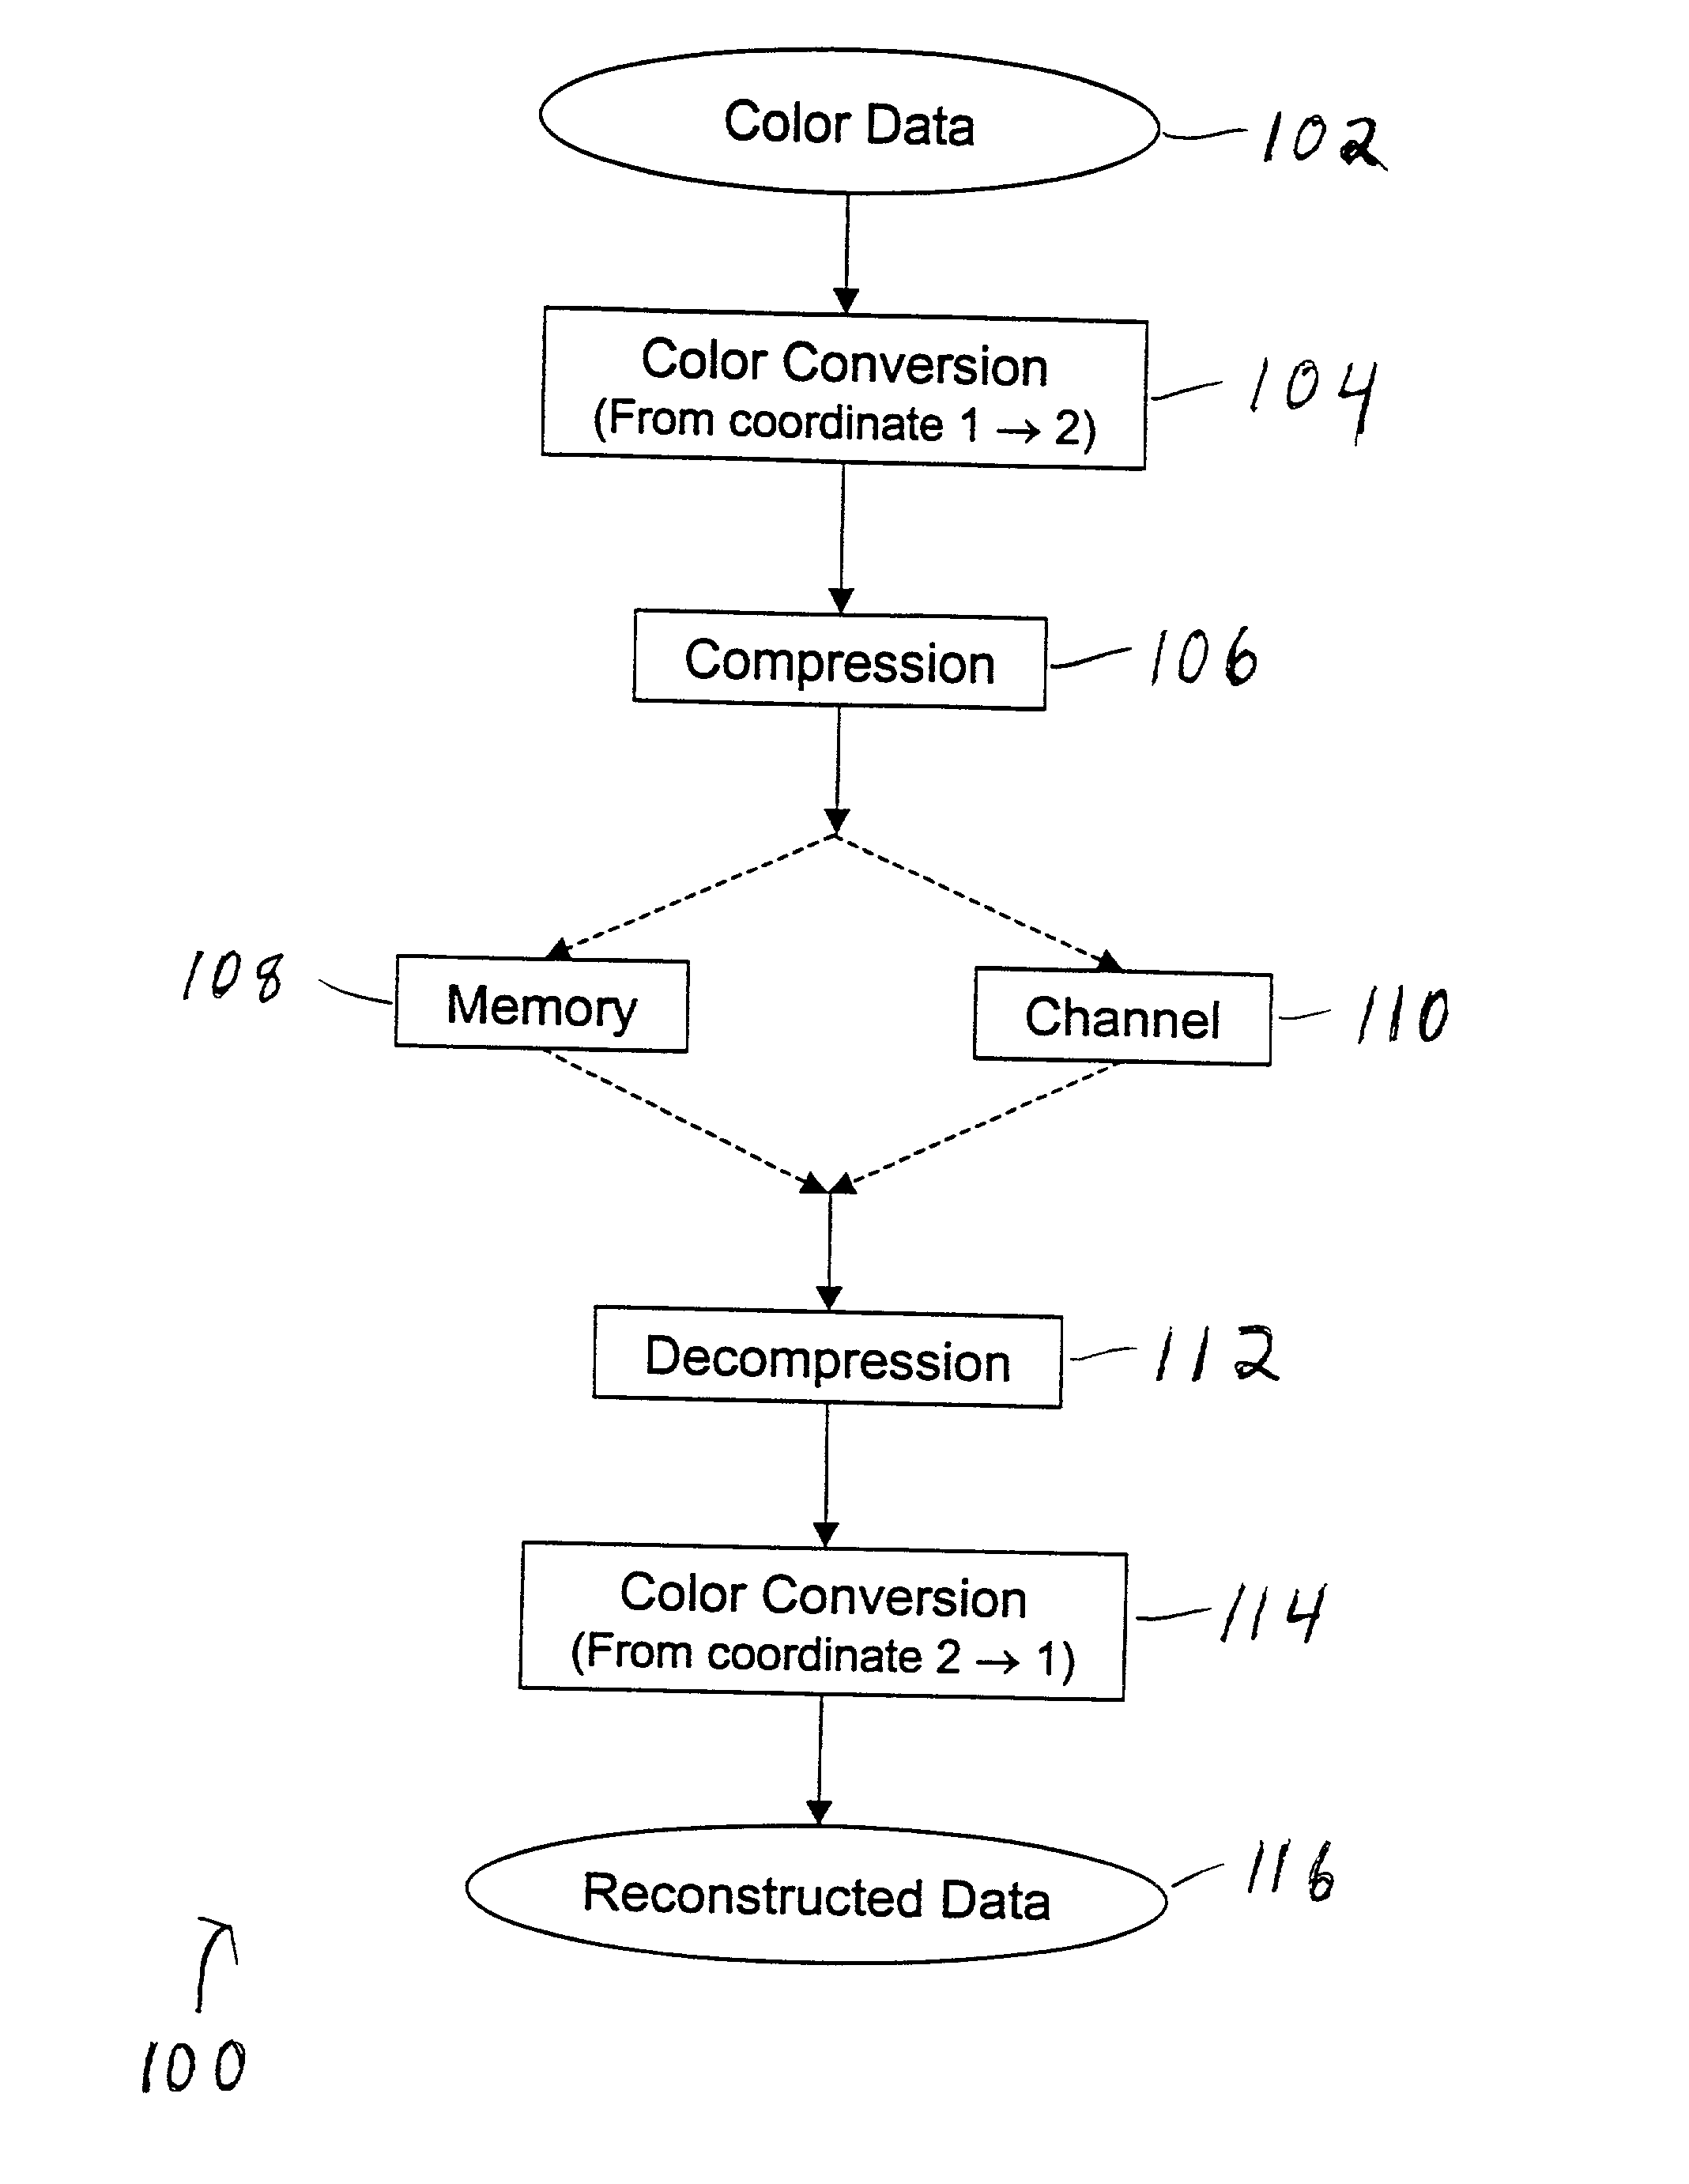 Method and apparatus for RGB color conversion that can be used in conjunction with lossless and lossy image compression